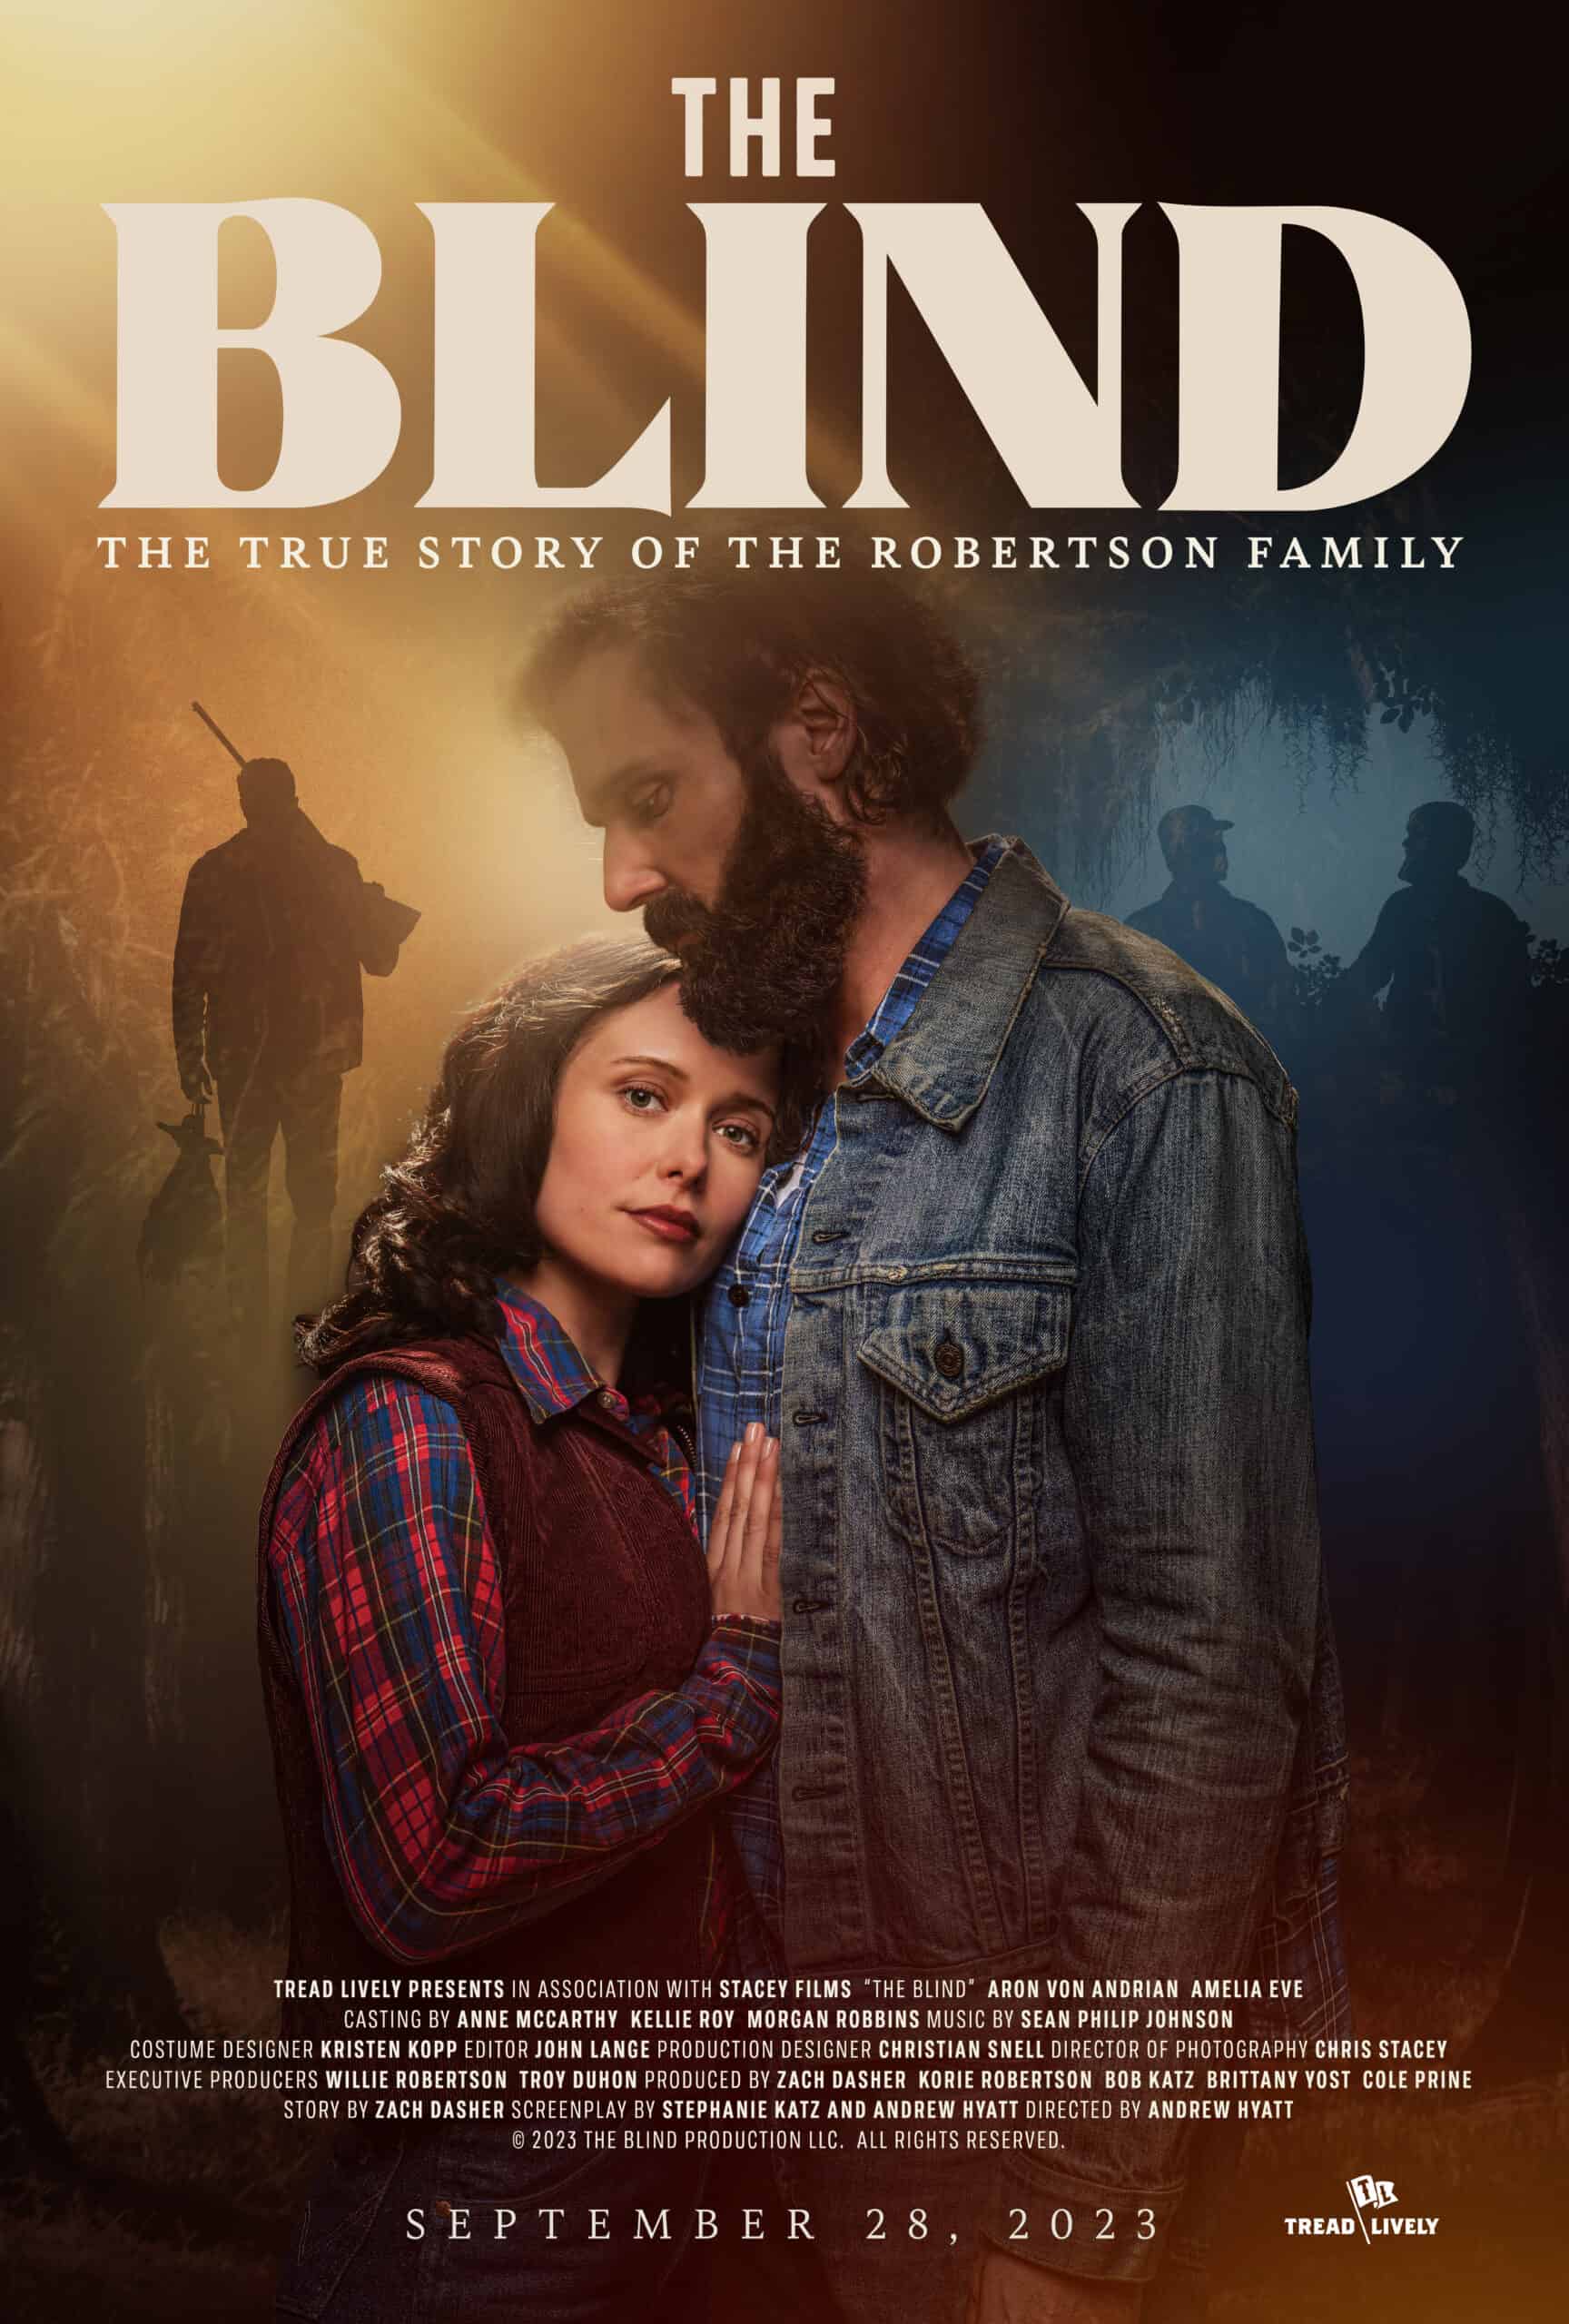 the blind christian movie review